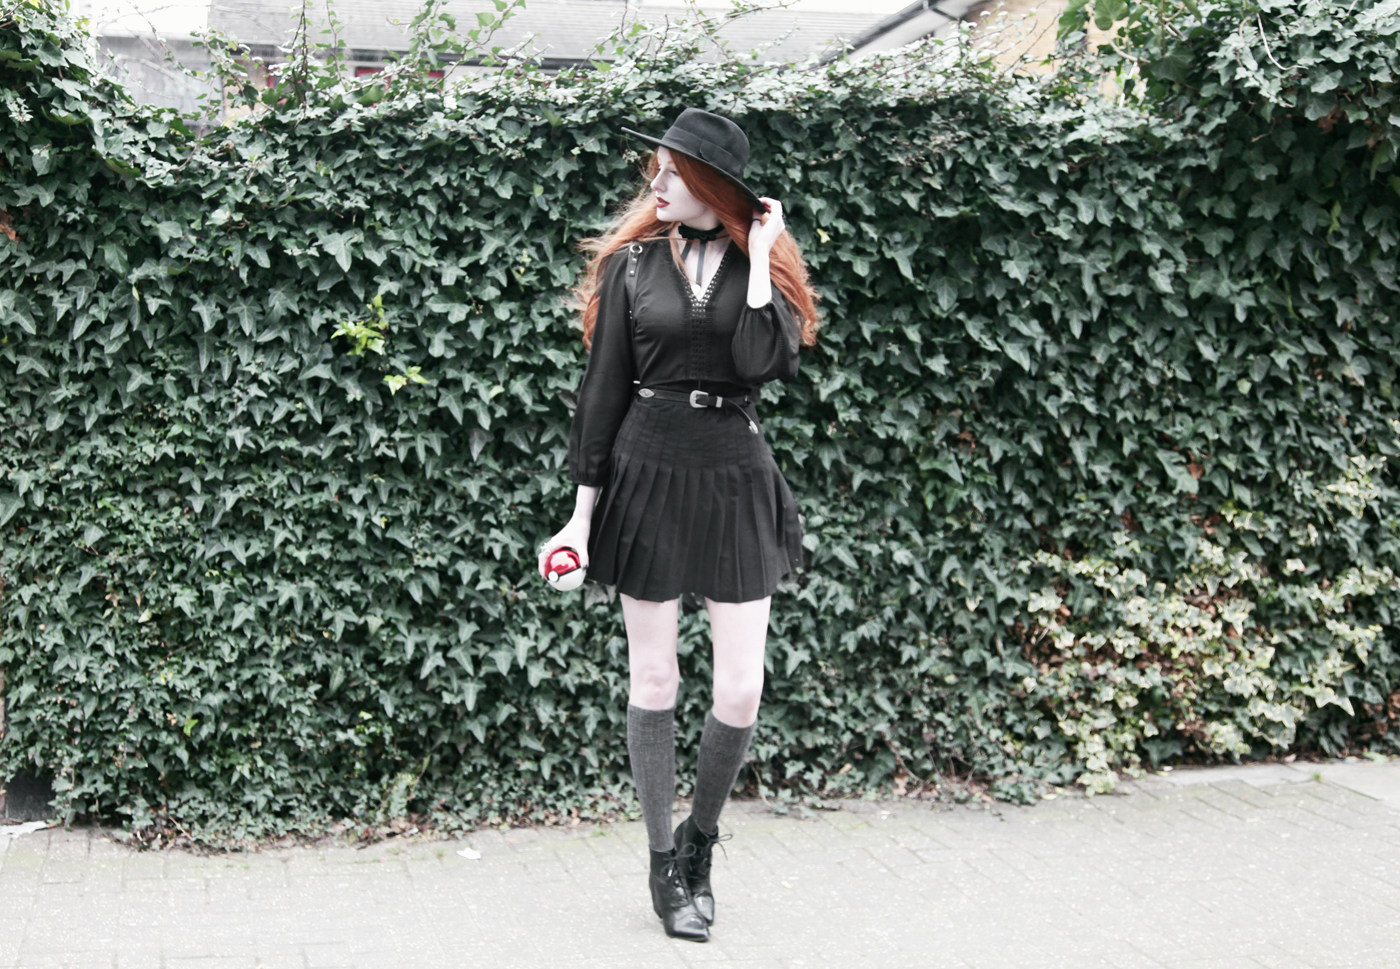 Olivia Emily wears Asos folk crop top, Valfre Bowie choker, American Apparel pleated skirt and YRU Aura boots